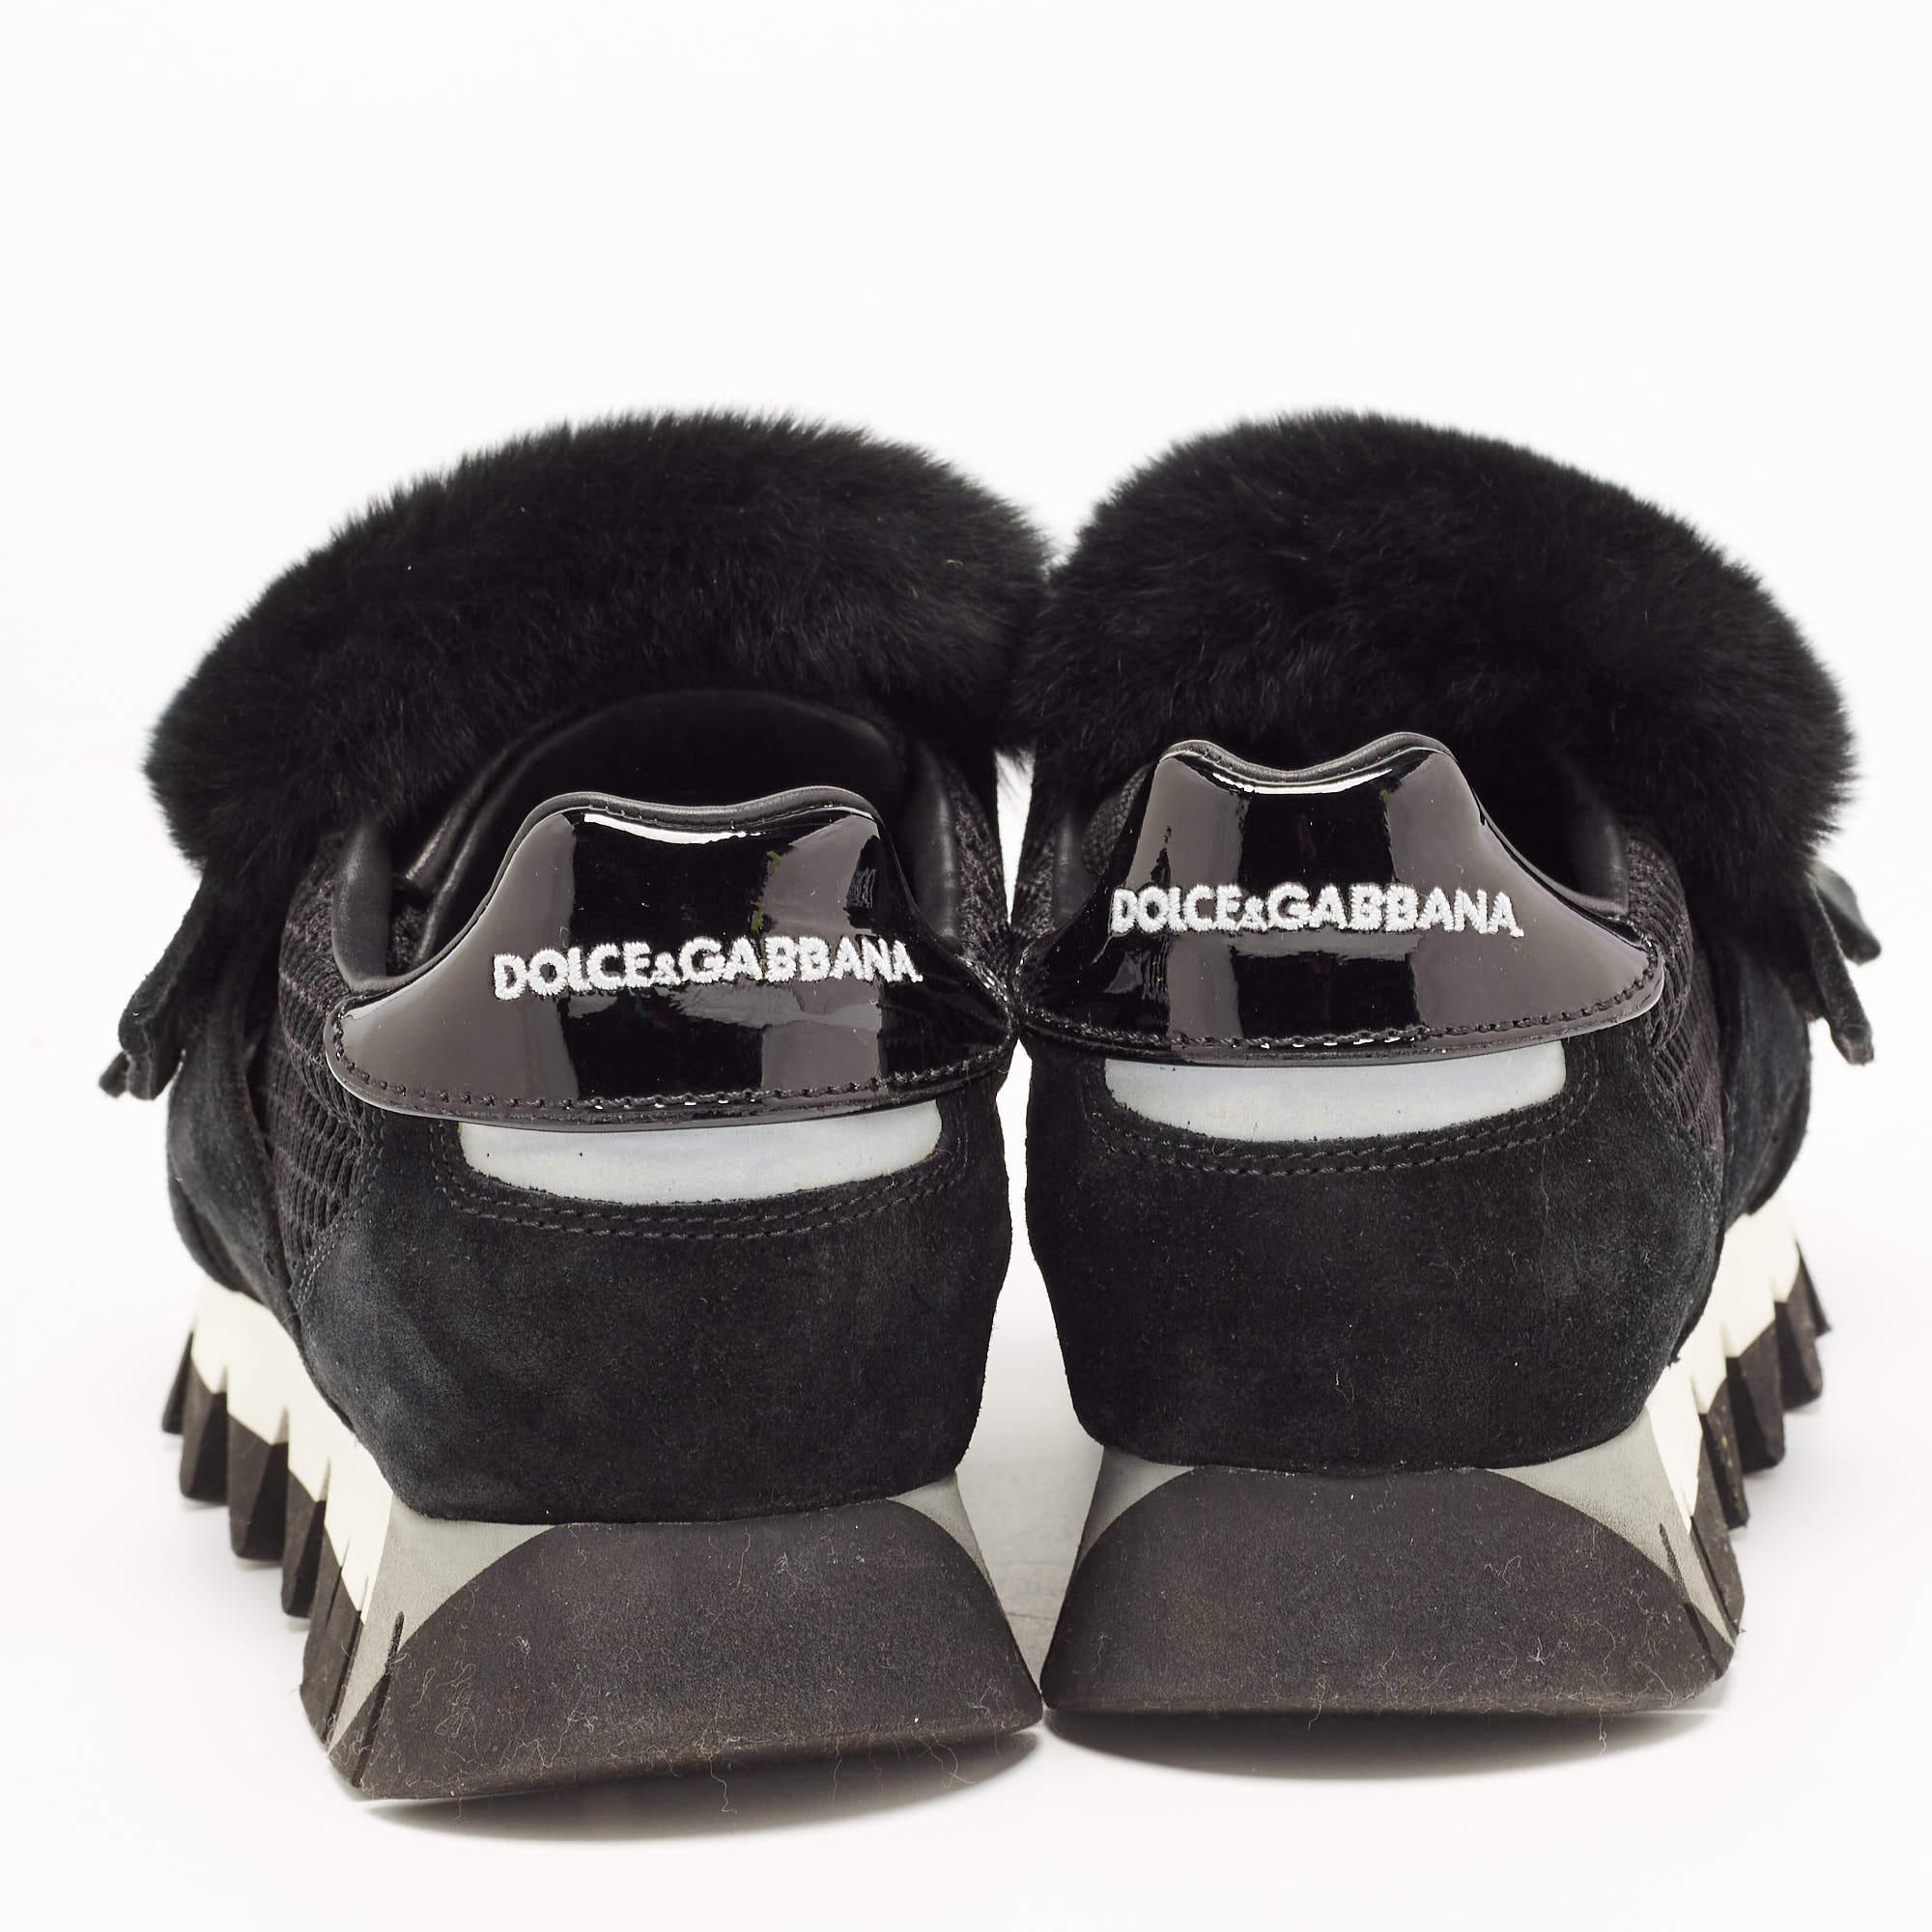 Dolce & Gabbana Black Mesh and Fur Low Top Sneakers Size 39 For Sale 3